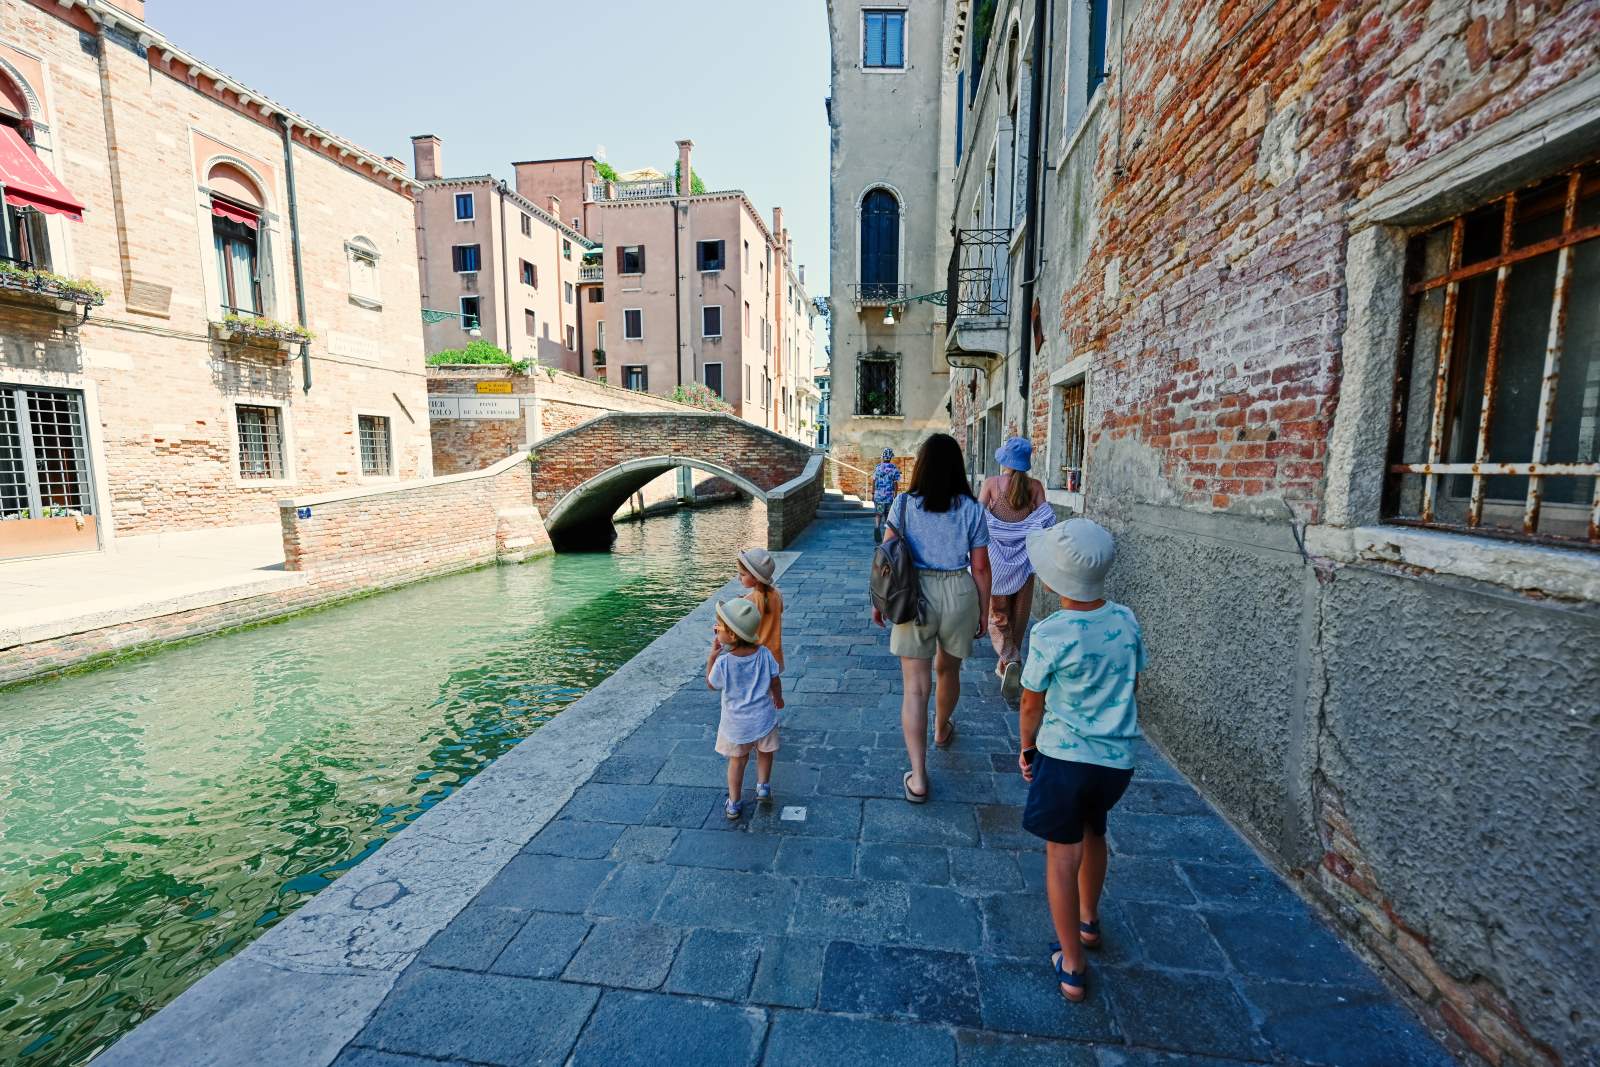 Image Credit: Shutterstock / AS photo family <p><span>Exemptions will also be given to children under the age of 14, holders of the European Disability Card, Armed Forces, and Law Enforcement Forces personell, those who reside in the Veneto region, and those who were born in Venice. Italians residing outside the Veneto region will also be required to pay. </span></p>